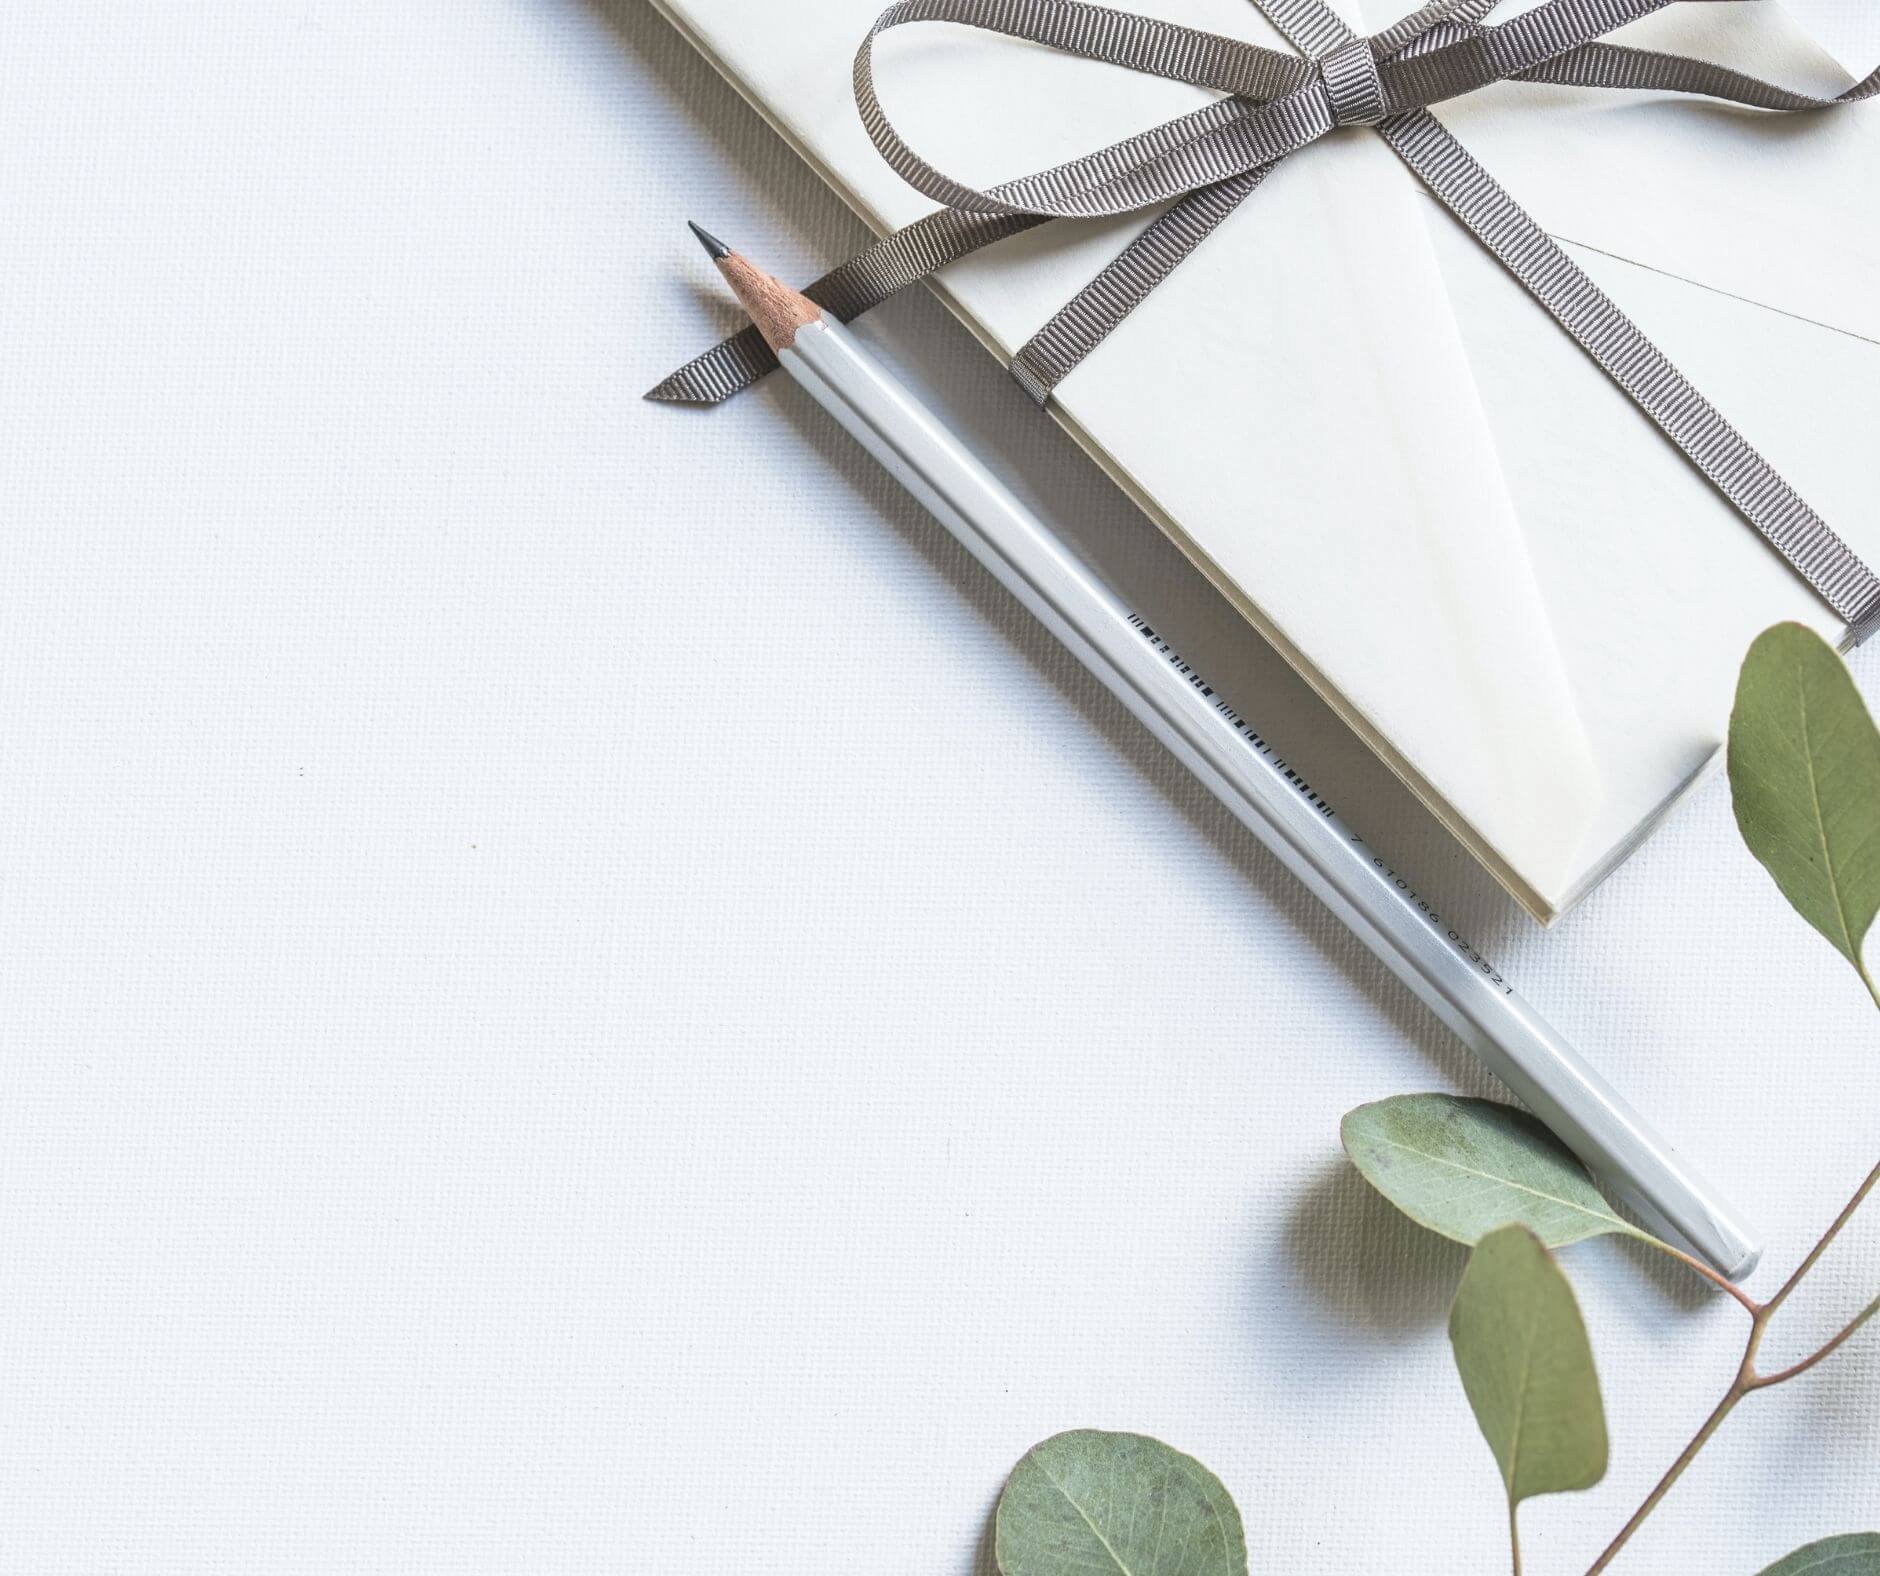 Wrapped gift with ribbon beside a pencil and eucalyptus leaves on a white background by Studio Anansi.